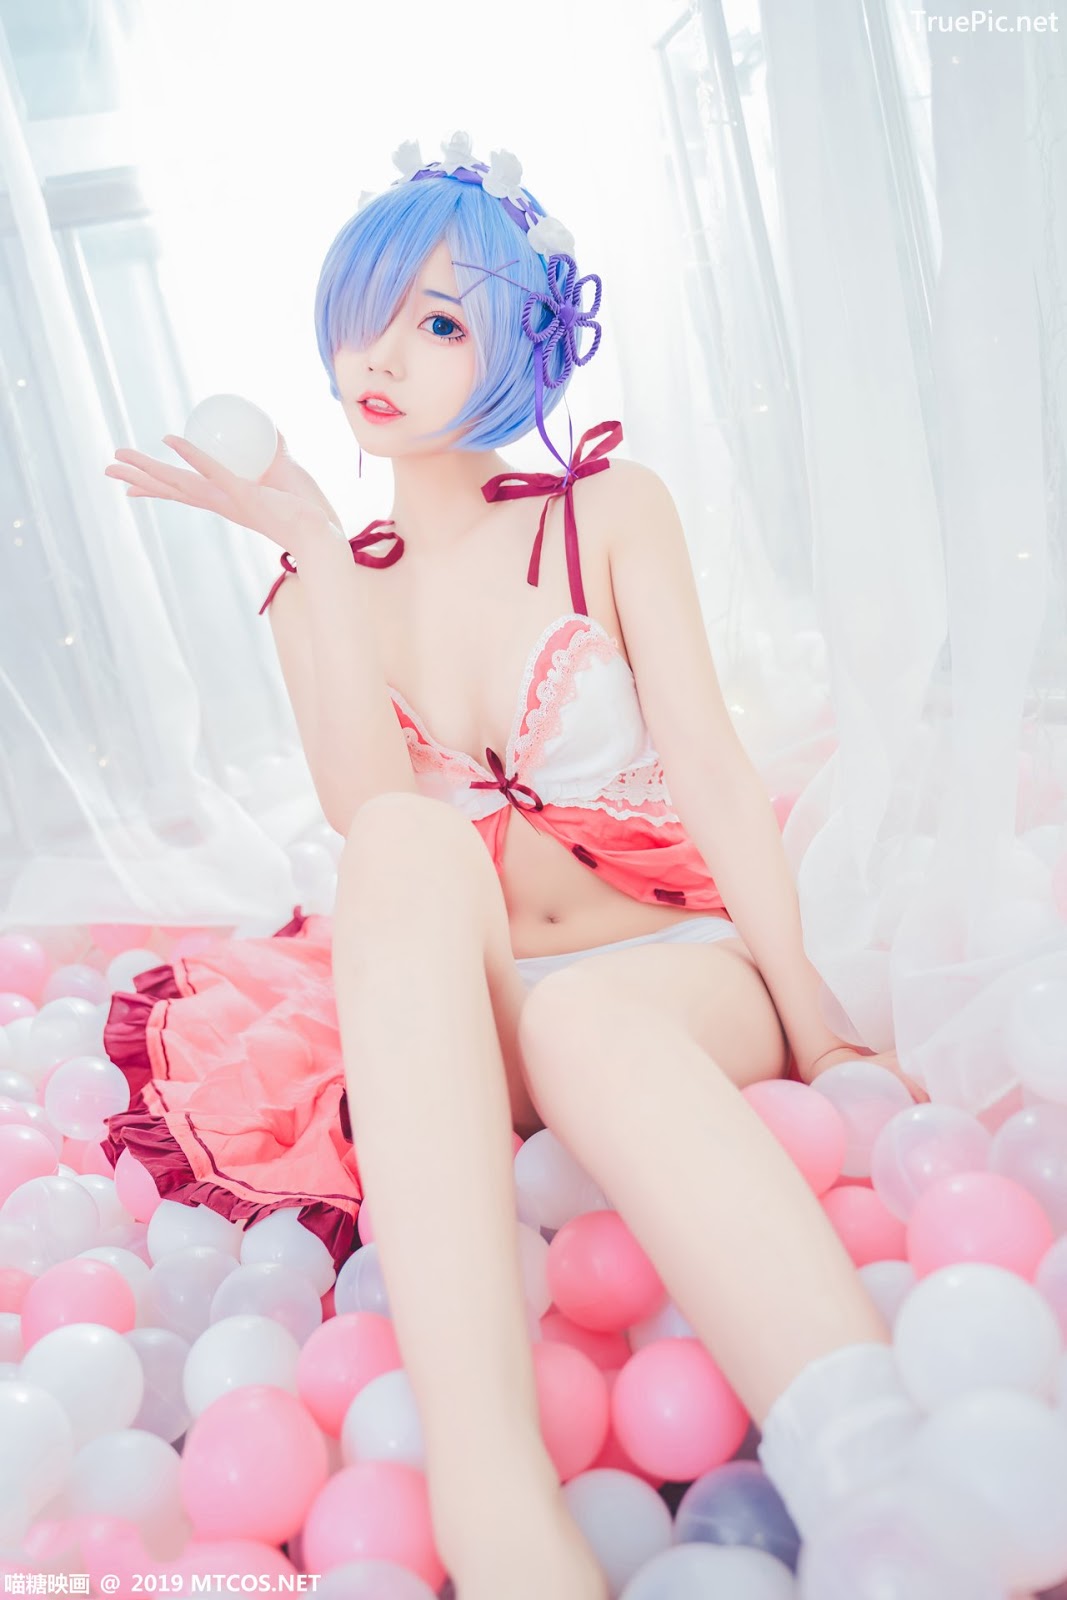 Image [MTCos] 喵糖映画 Vol.018 – Chinese Cute Model – Beautiful Rem Cosplay - TruePic.net - Picture-9